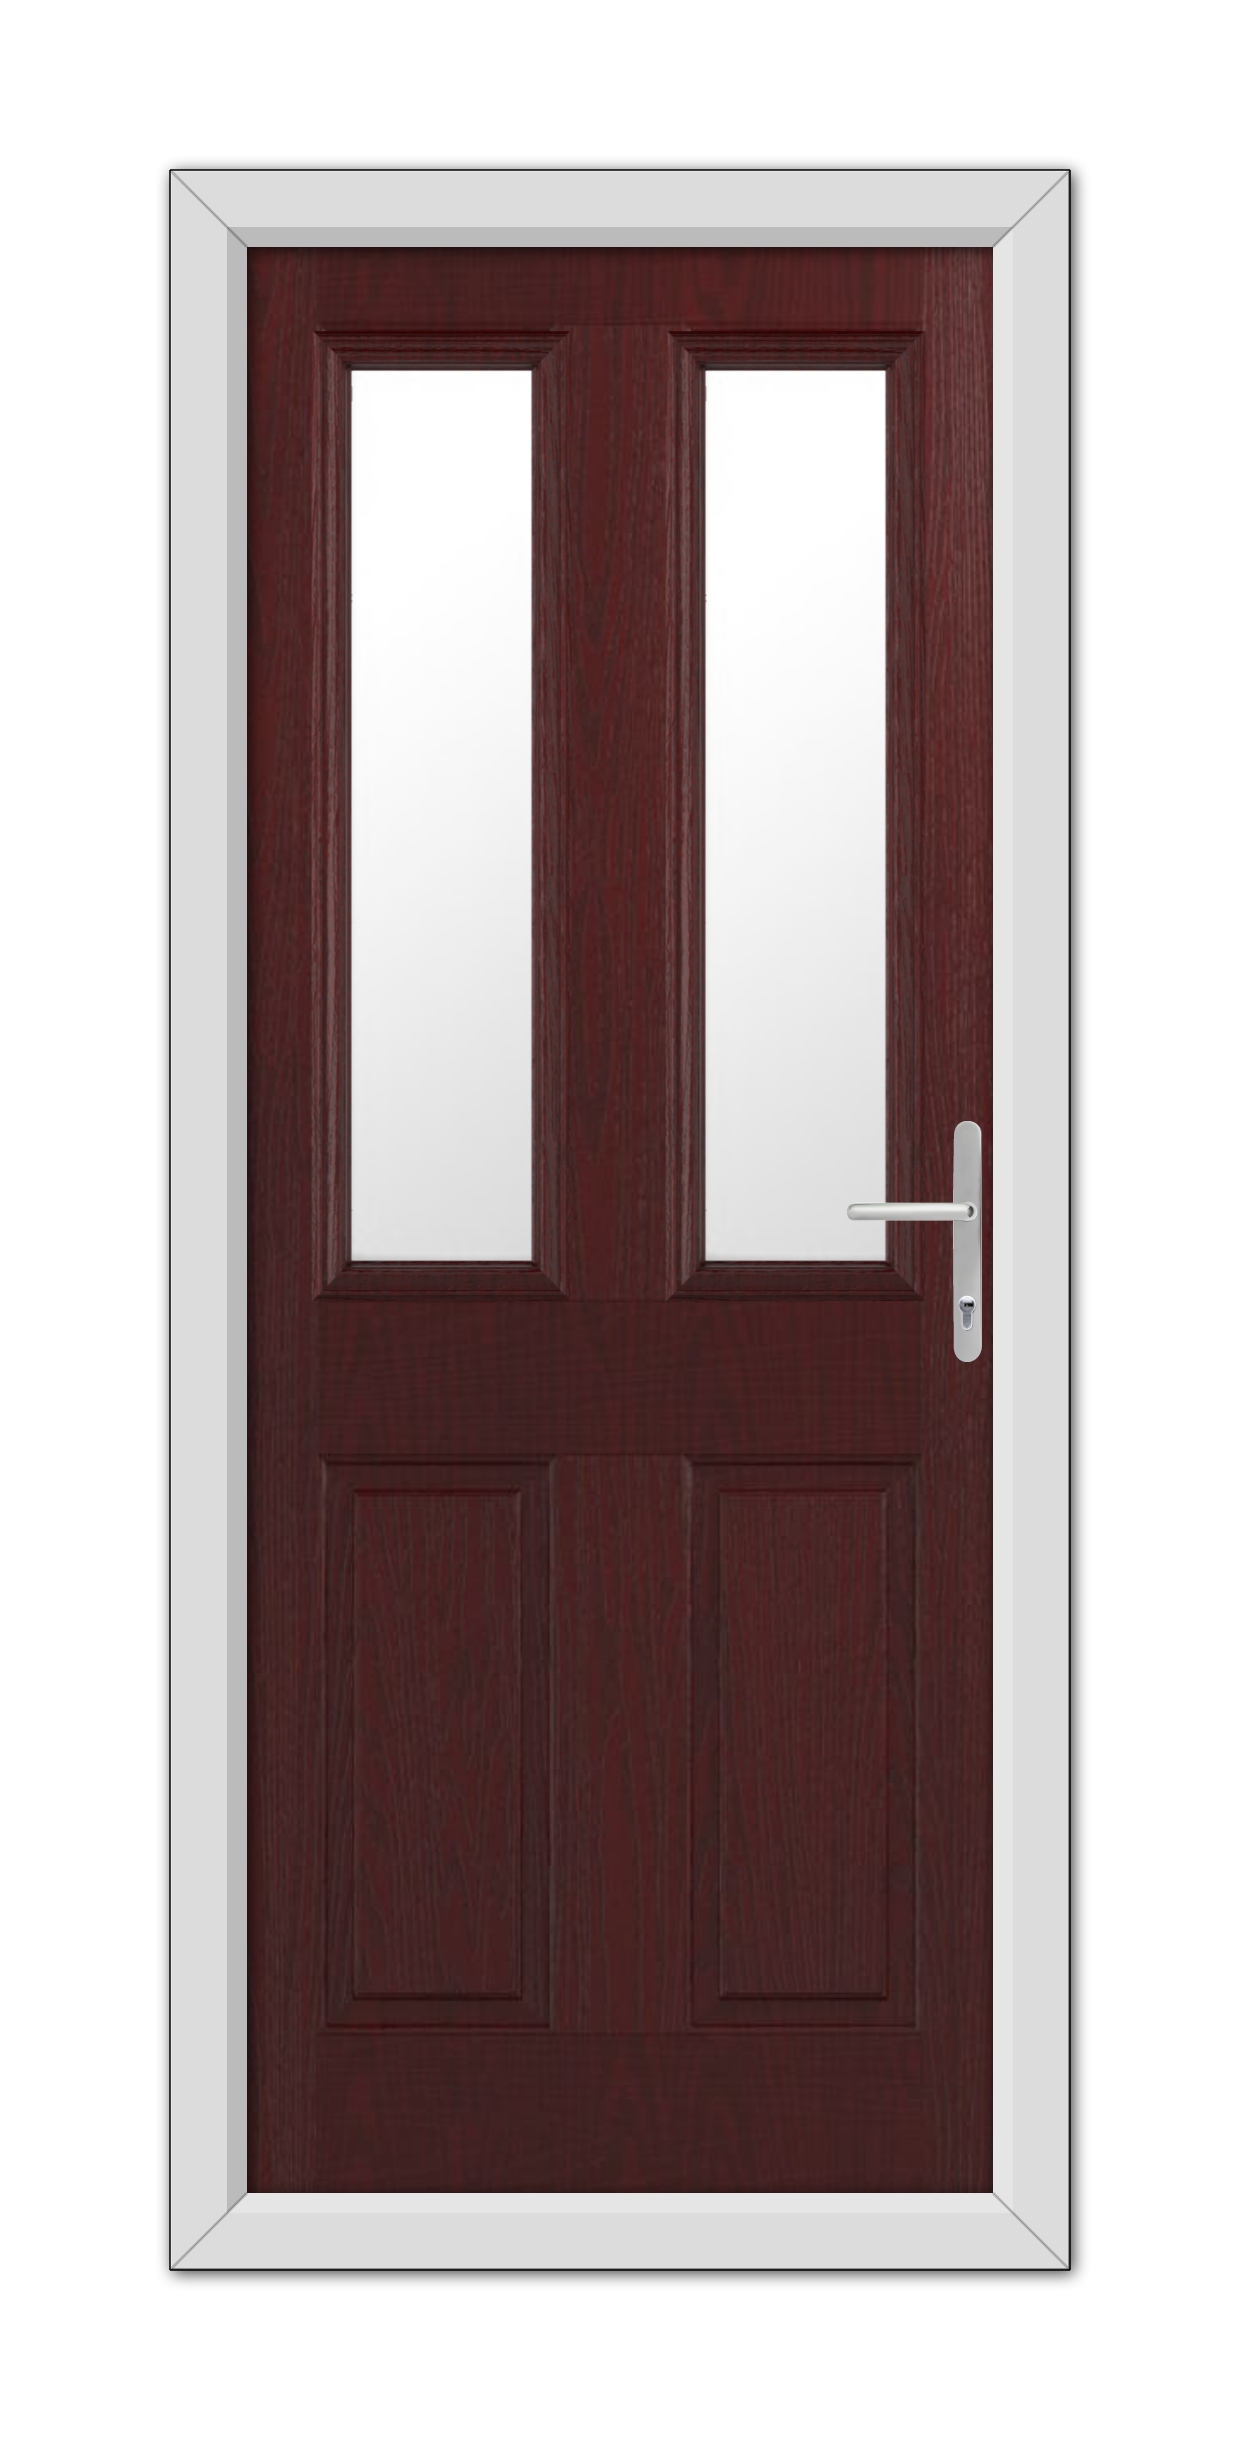 A modern Rosewood Whitmore Composite Door with two vertical glass panels and a white handle, framed by a simple white door frame.